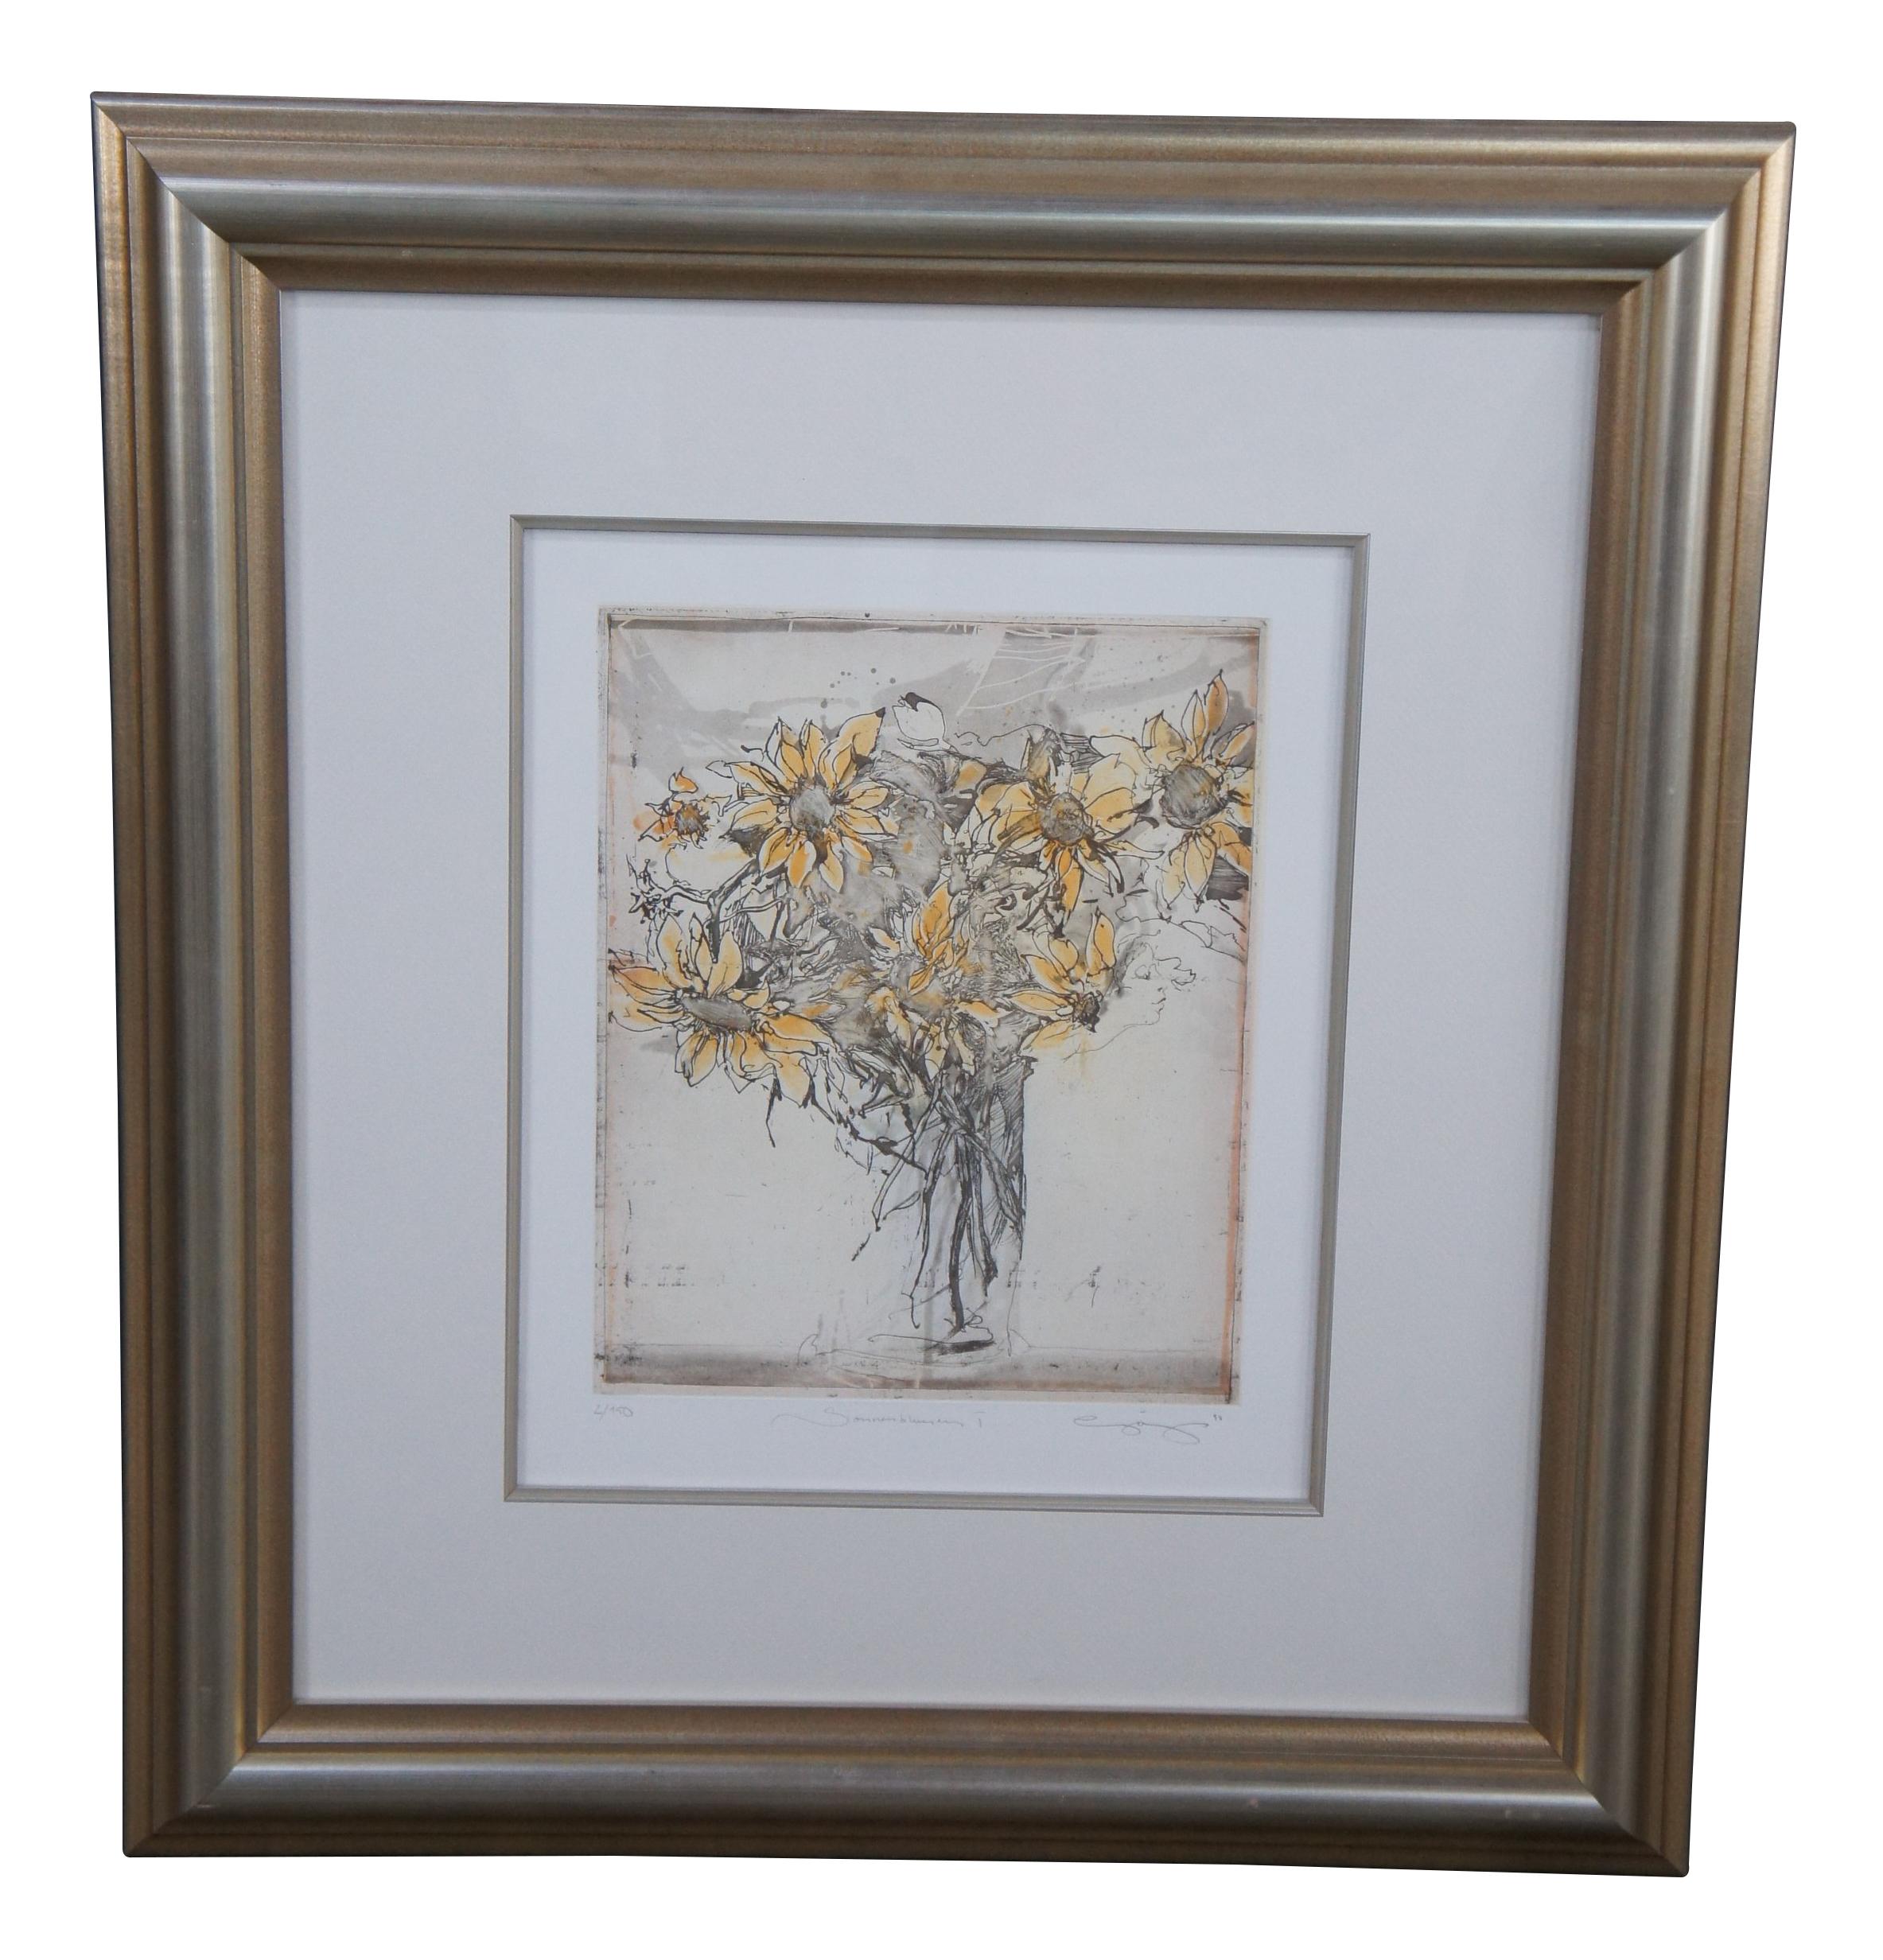 Vintage pair of floral Sunflower lithographs featuring a bouquet of flowers. Signed lower right, #2 of 150.

Dimensions: 
30.5